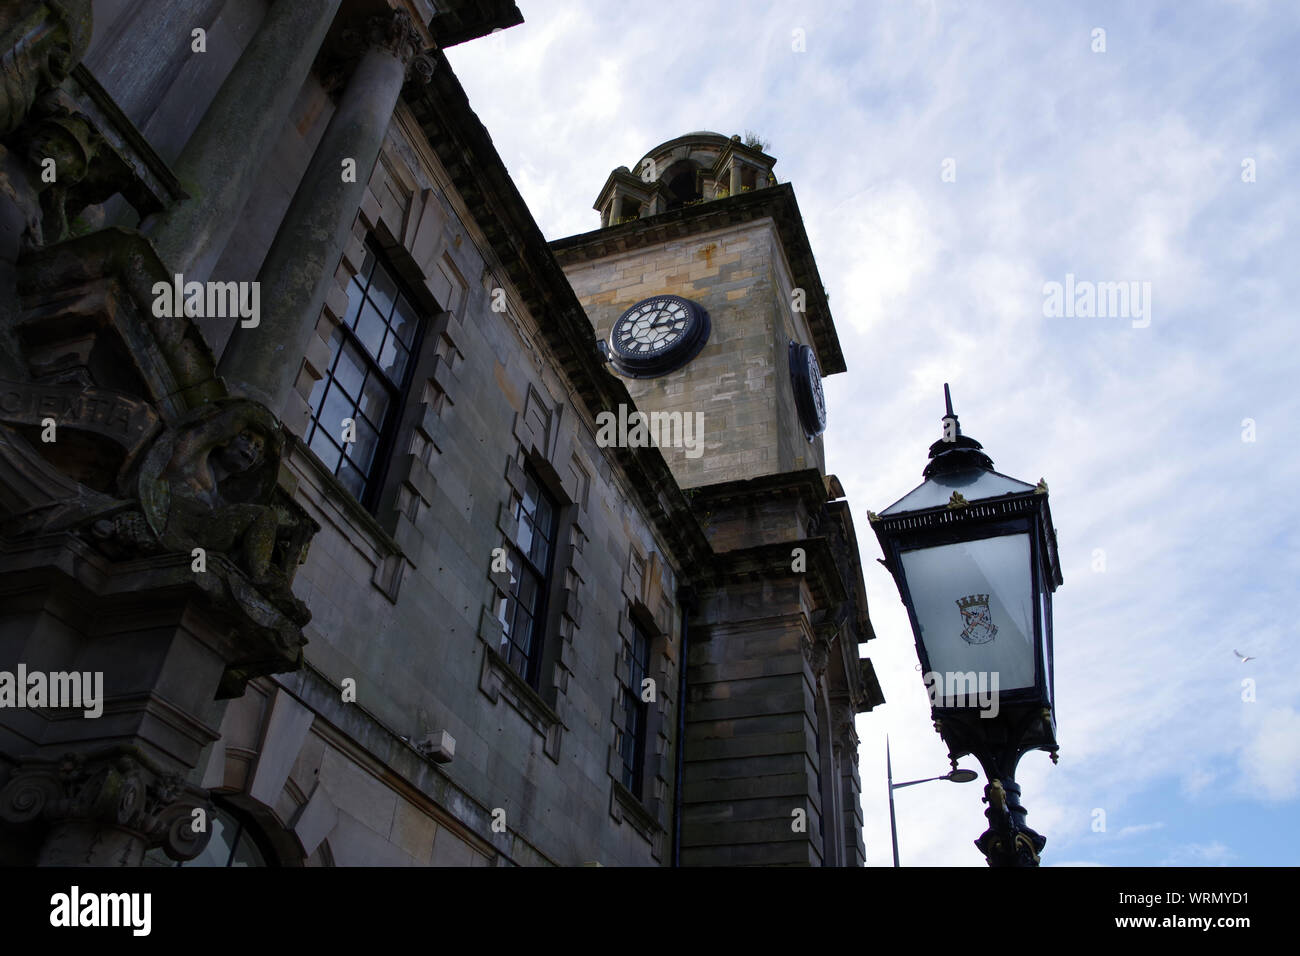 Clydebank Town Hall clock and Council Street lamp Stock Photo